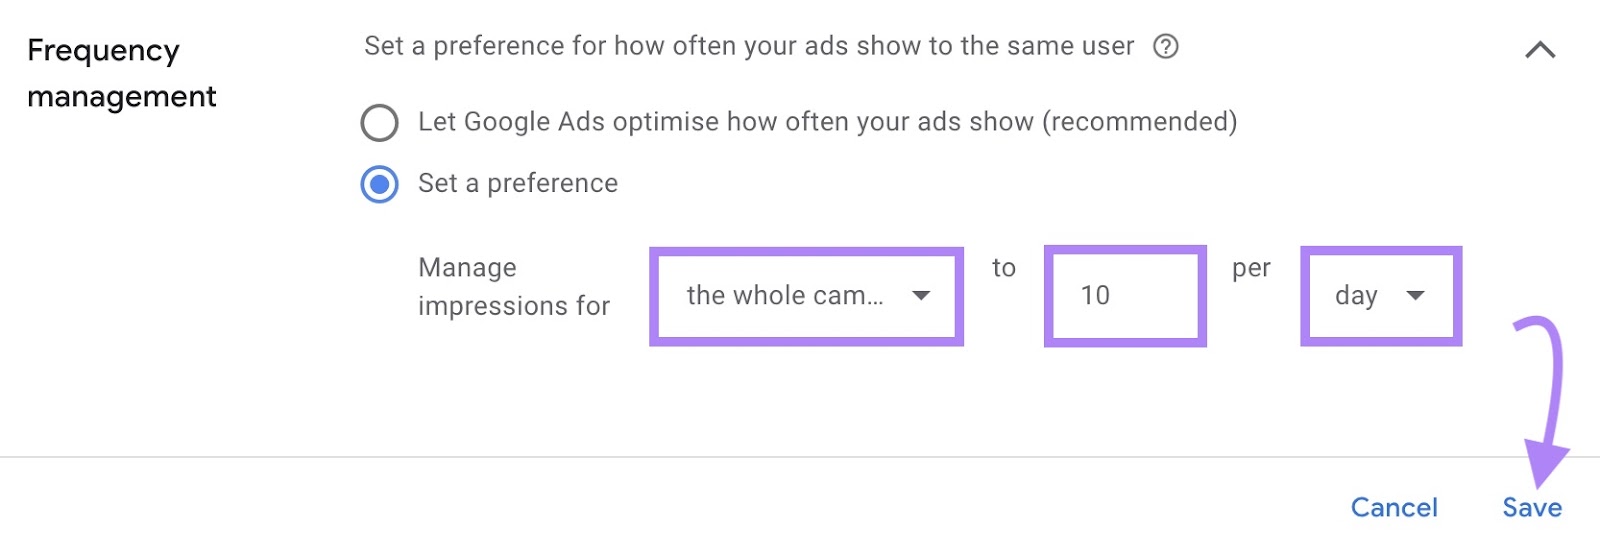 Frequency management settings on Google Ads with '10 impressions per day' selected for the whole campaign.